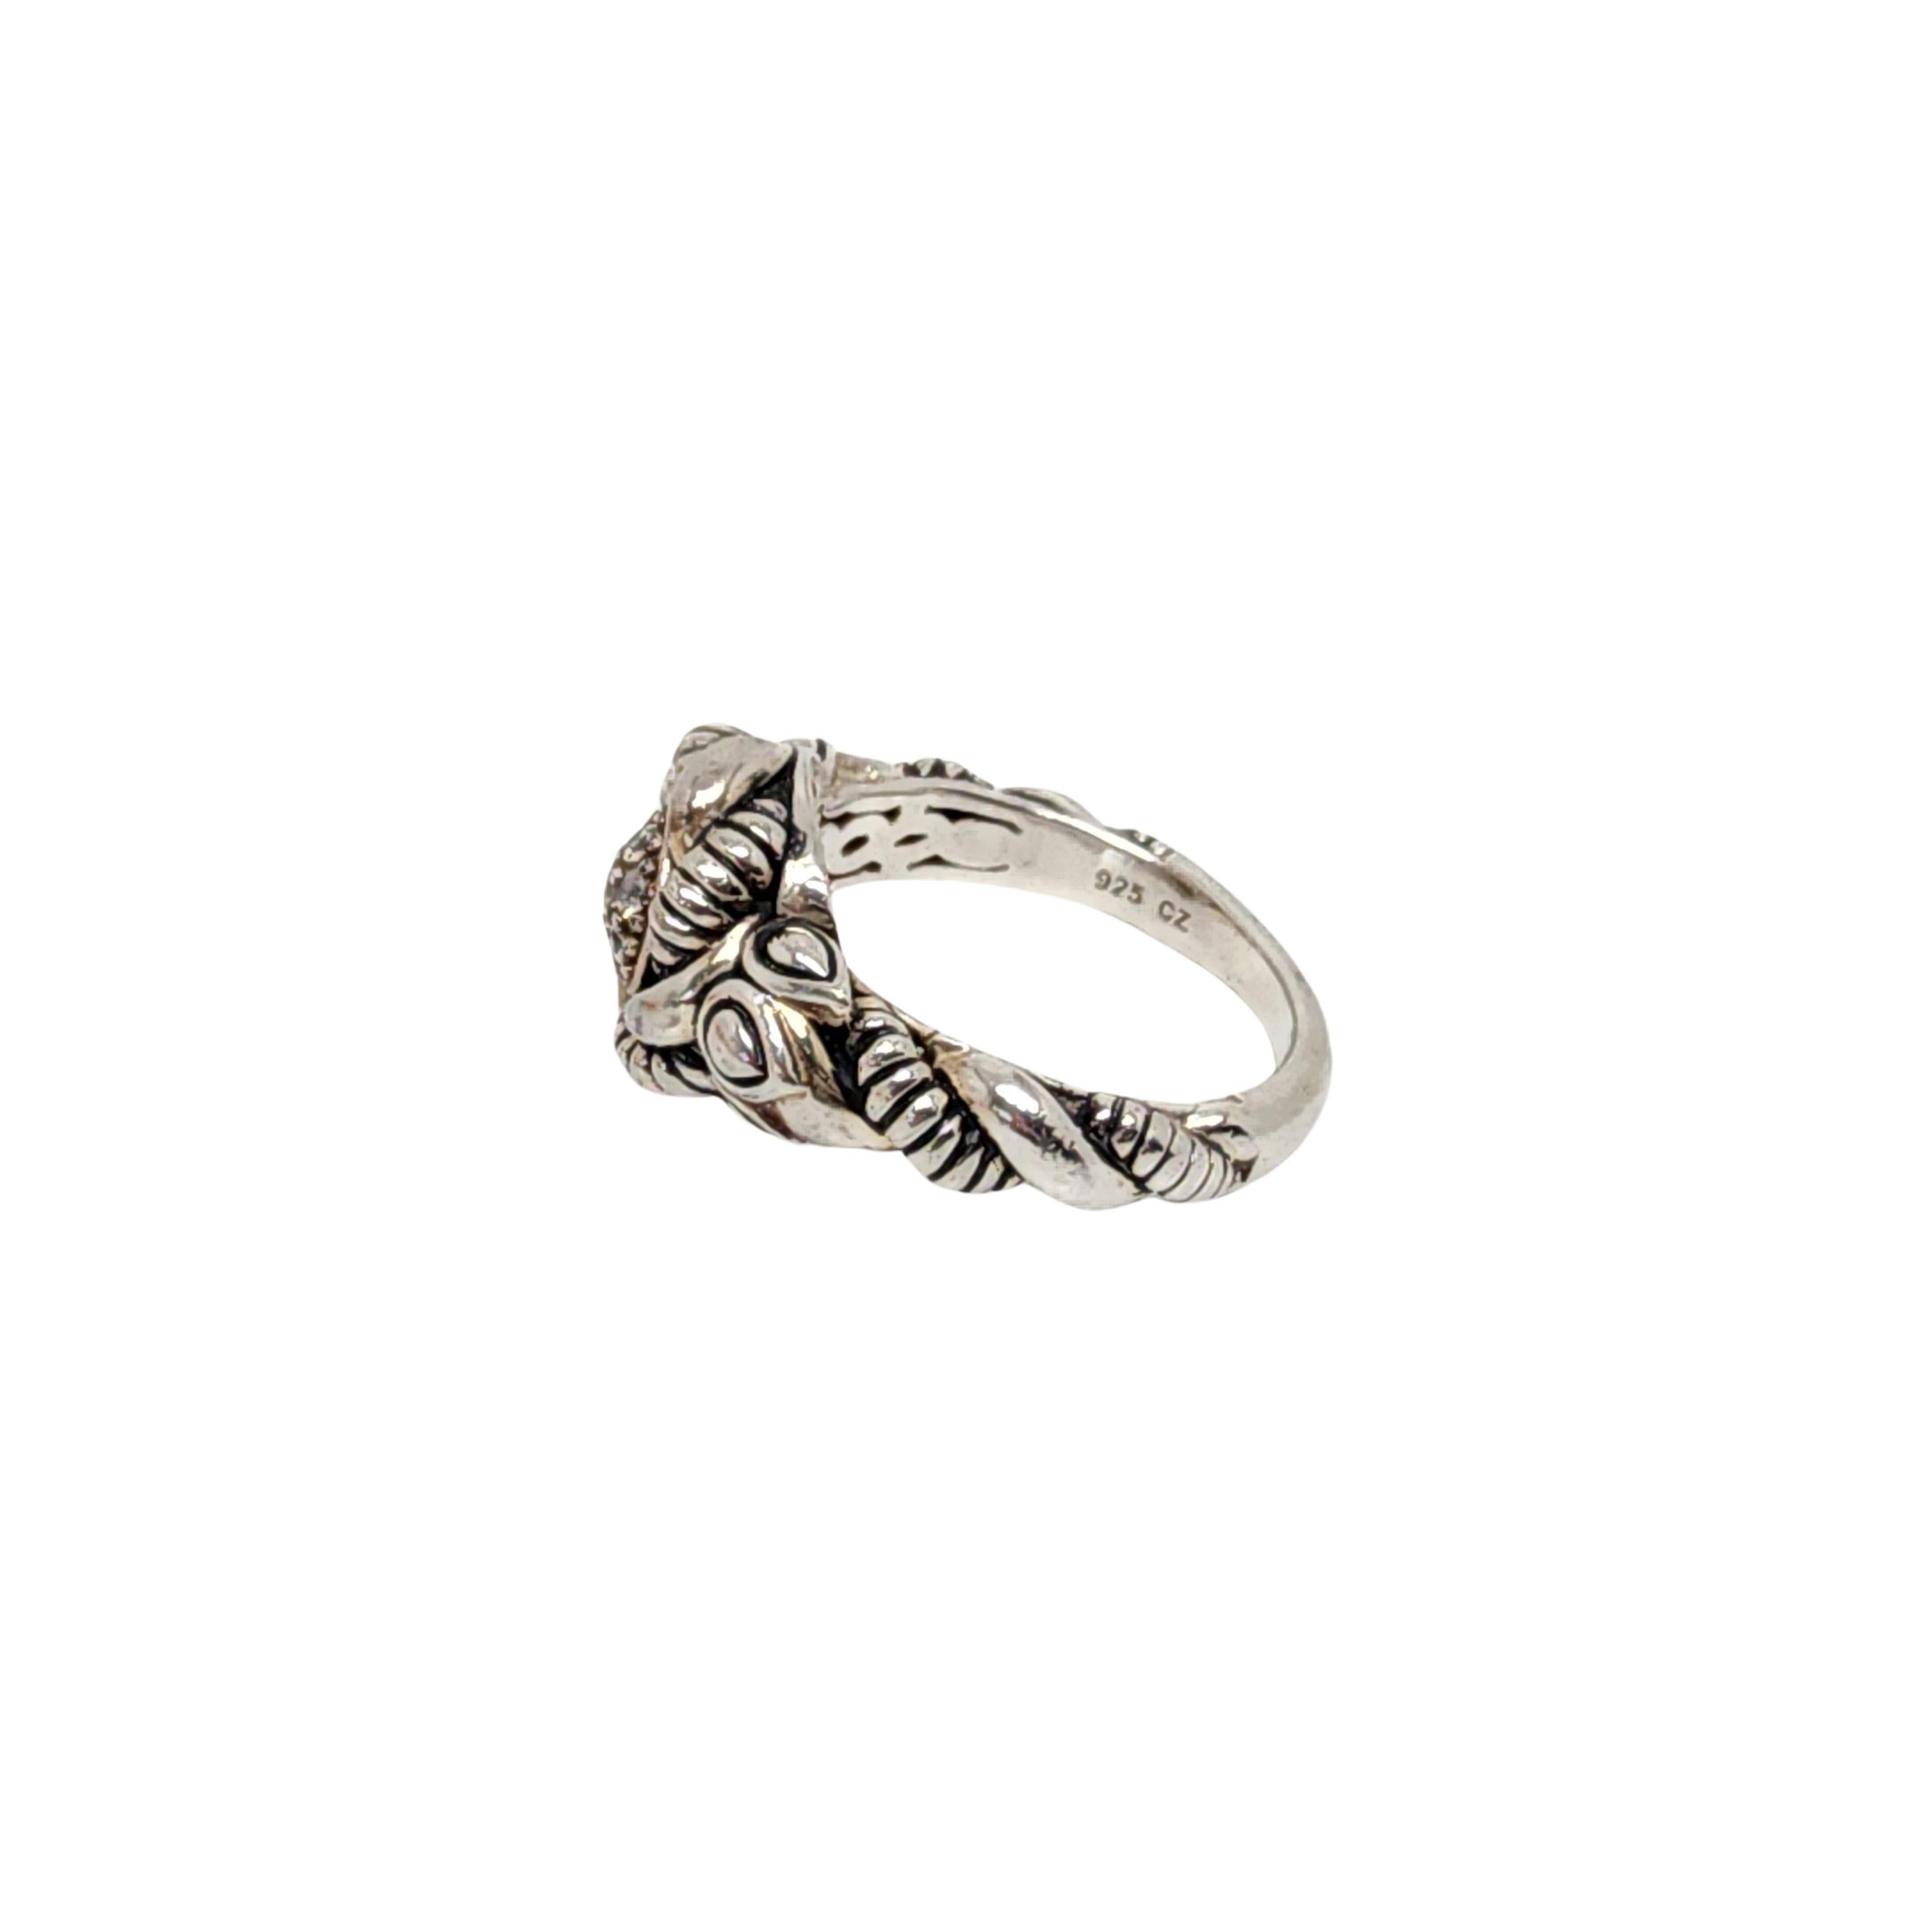 JAI by John Hardy sterling silver clear CZ ring.

Size 7

From the affordable line JAI by John Hardy for QVC, this ring features a circle of pave small round CZs stones with alternating smooth and textured woven design.

Measures approx 1/2